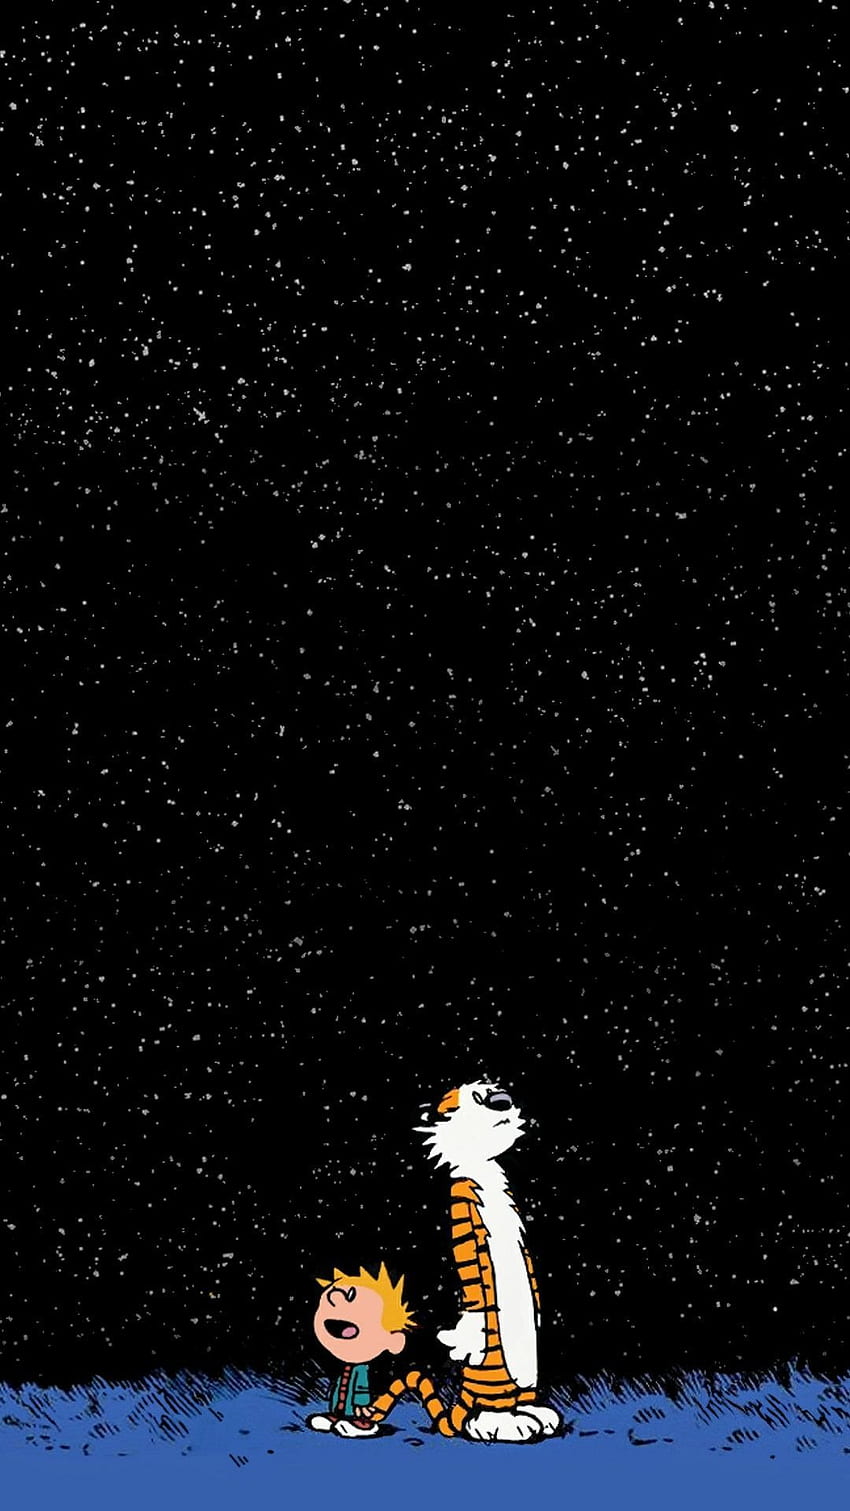 Request Can anyone turn this Calvin and hobbes into an, AMOLED HD phone wallpaper